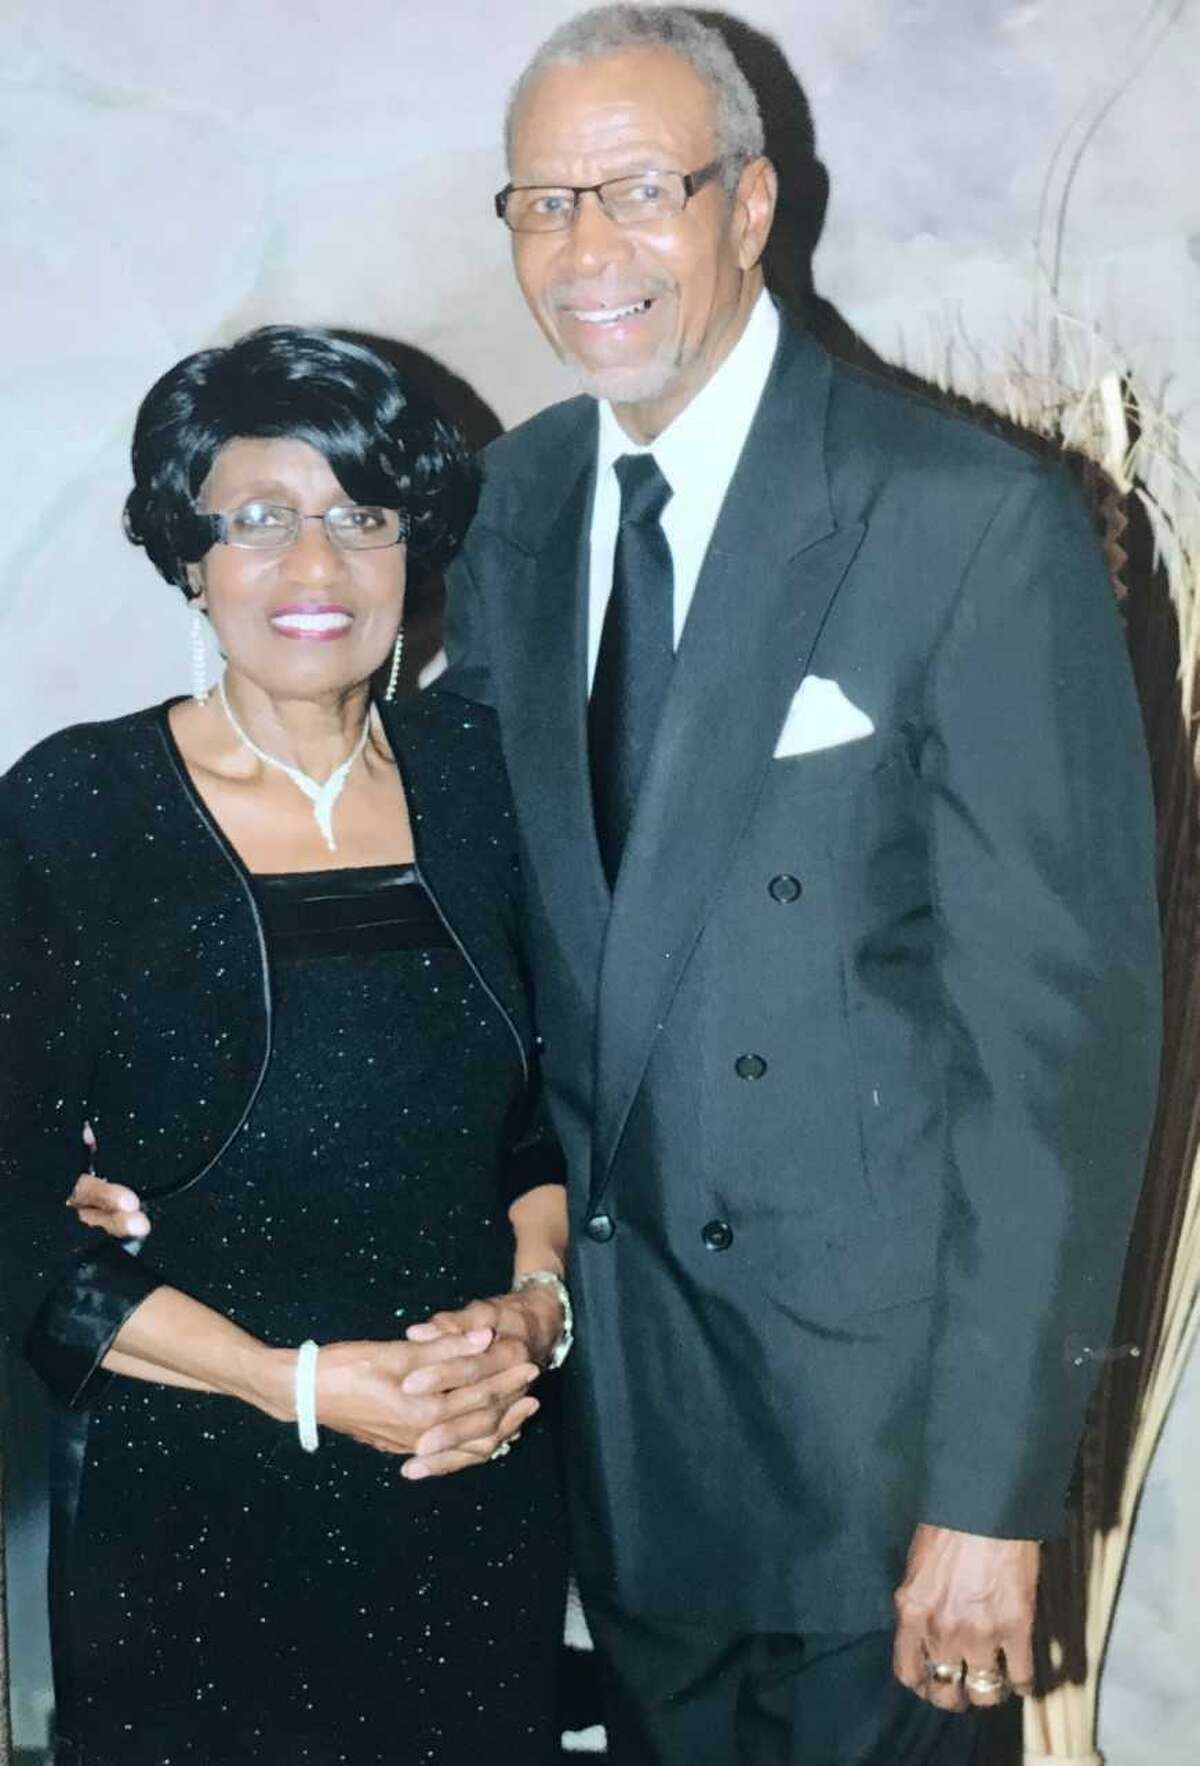 The West Haven Black Heritage Committee will honor Moses and Roberta Douglas as the 2018 African-American Citizens of the Year Wednesday in the committee's annual West Haven Black Heritage Celebration in City Hall.The ceremony will take place at 11 a.m. in the Harriet C. North Community Room on the second floor of City Hall, 355 Main St.